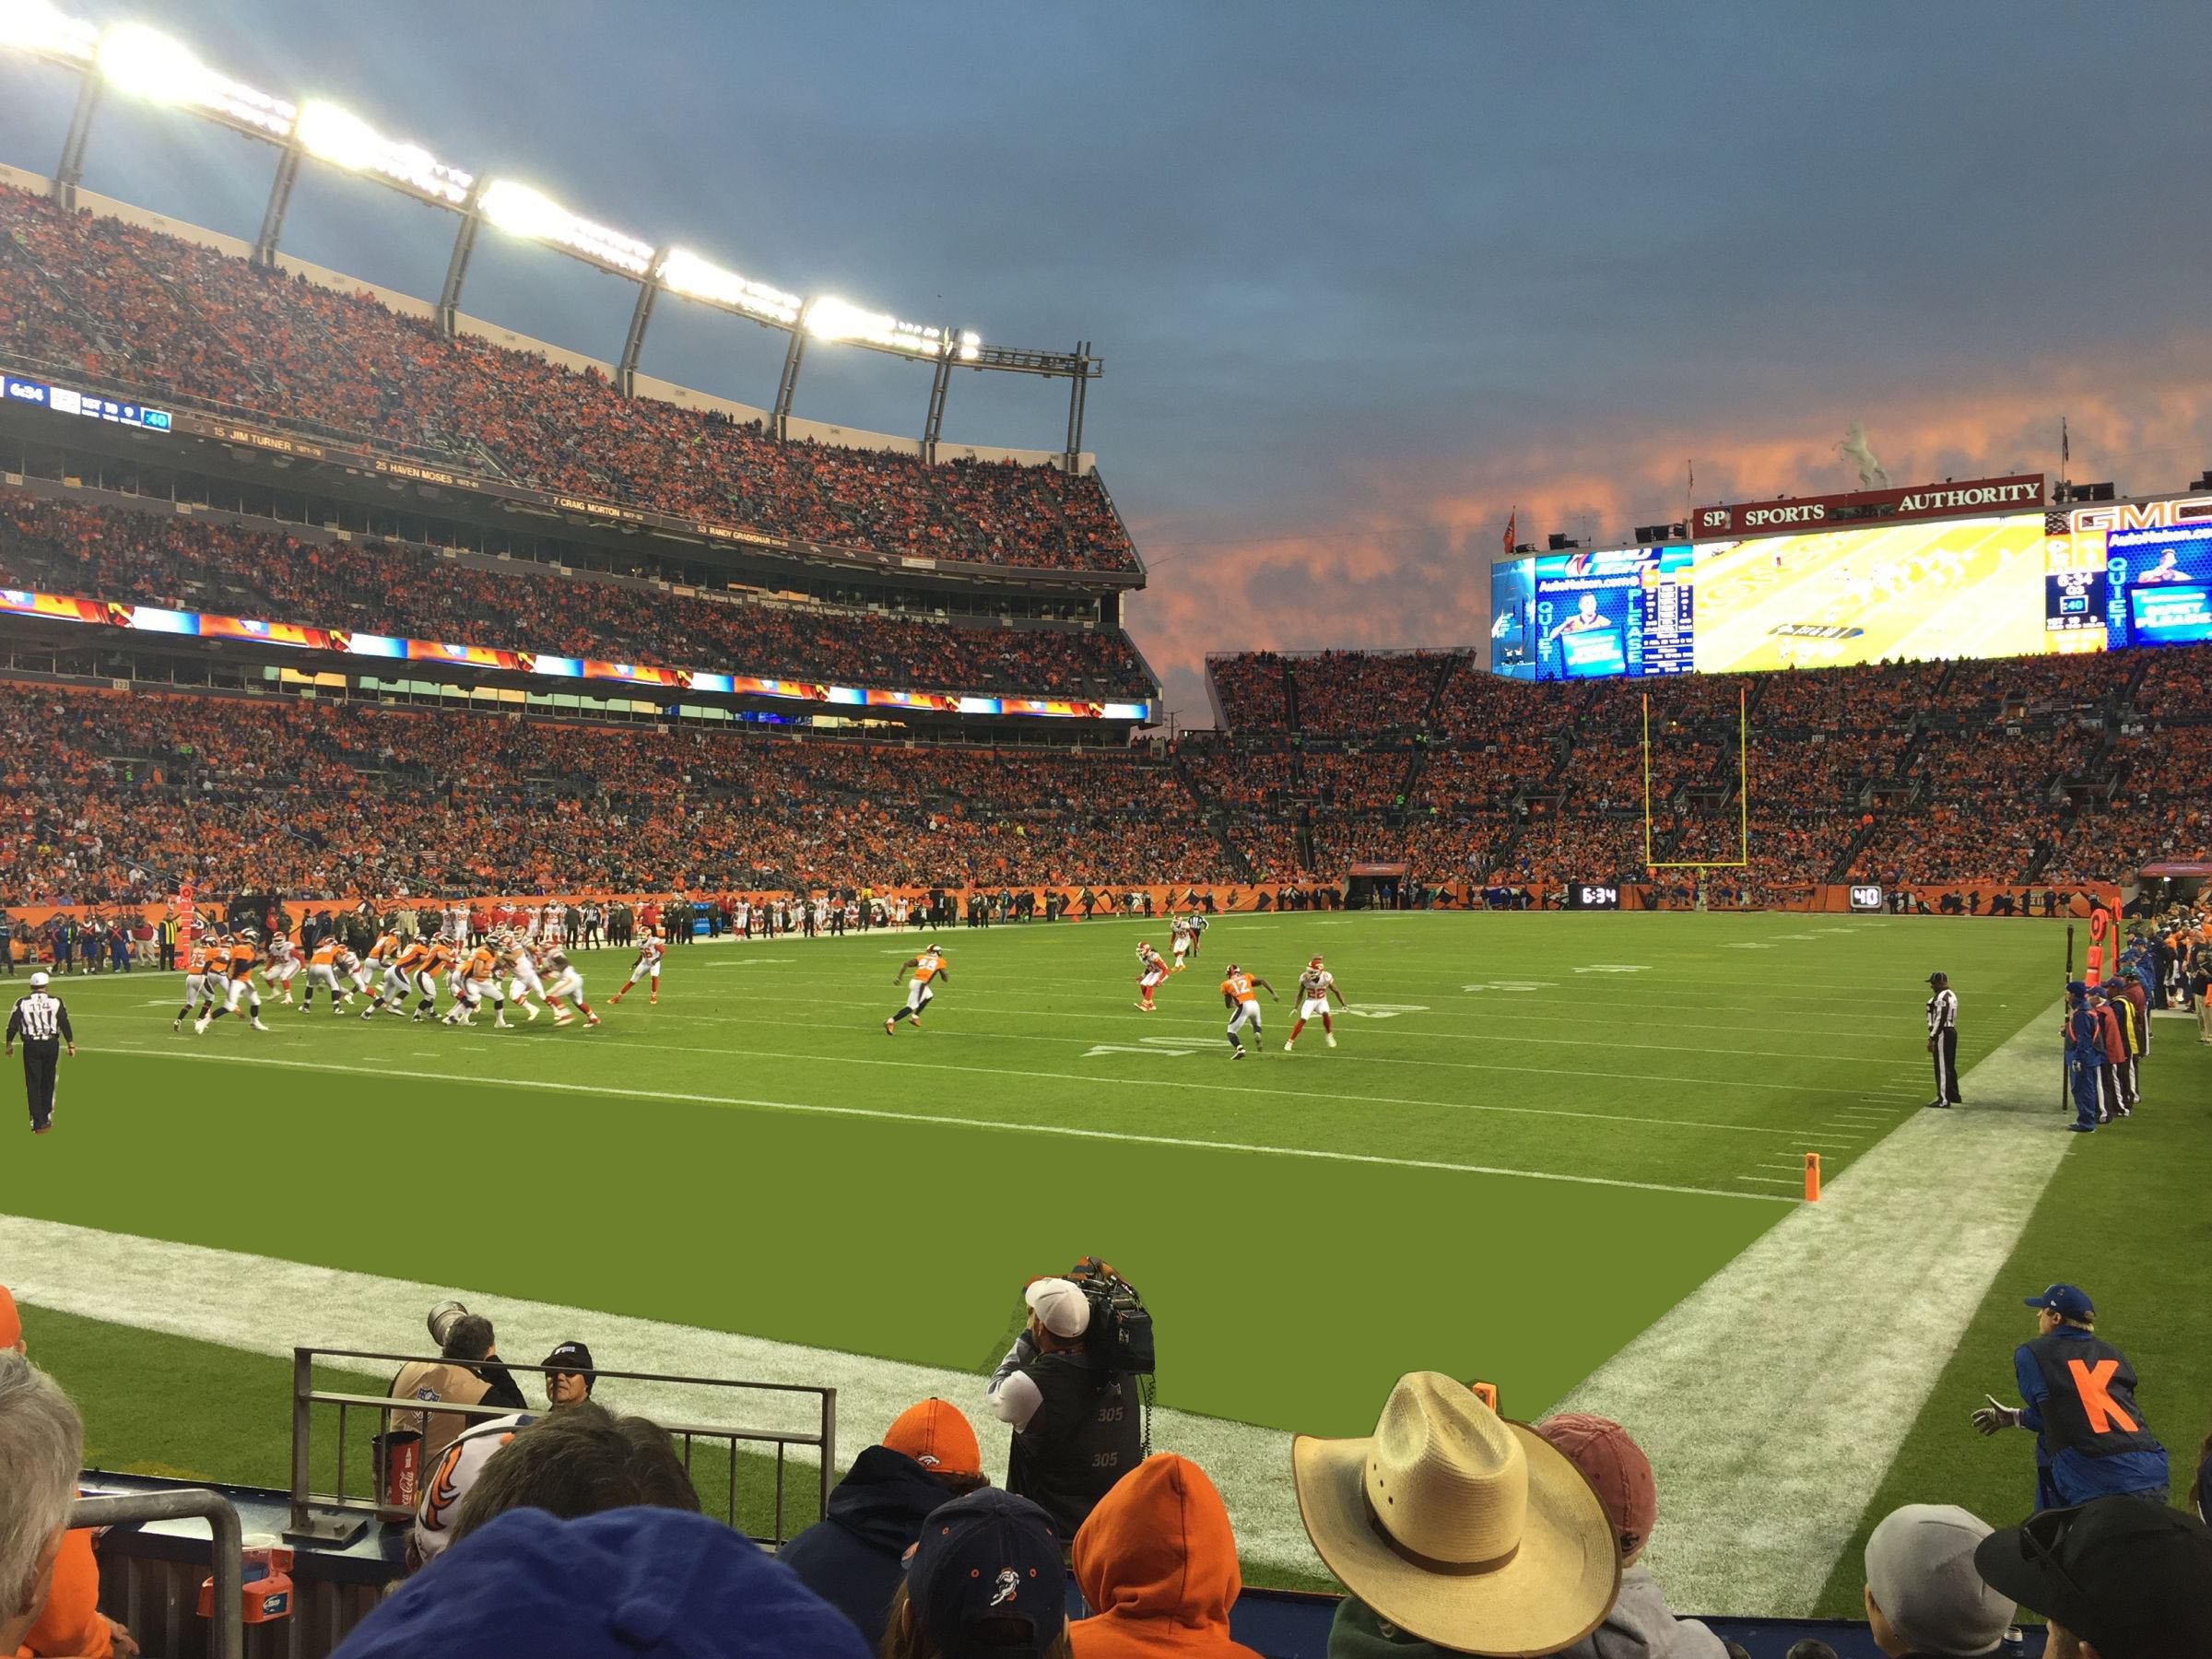 section 111, row 5 seat view  - empower field (at mile high)